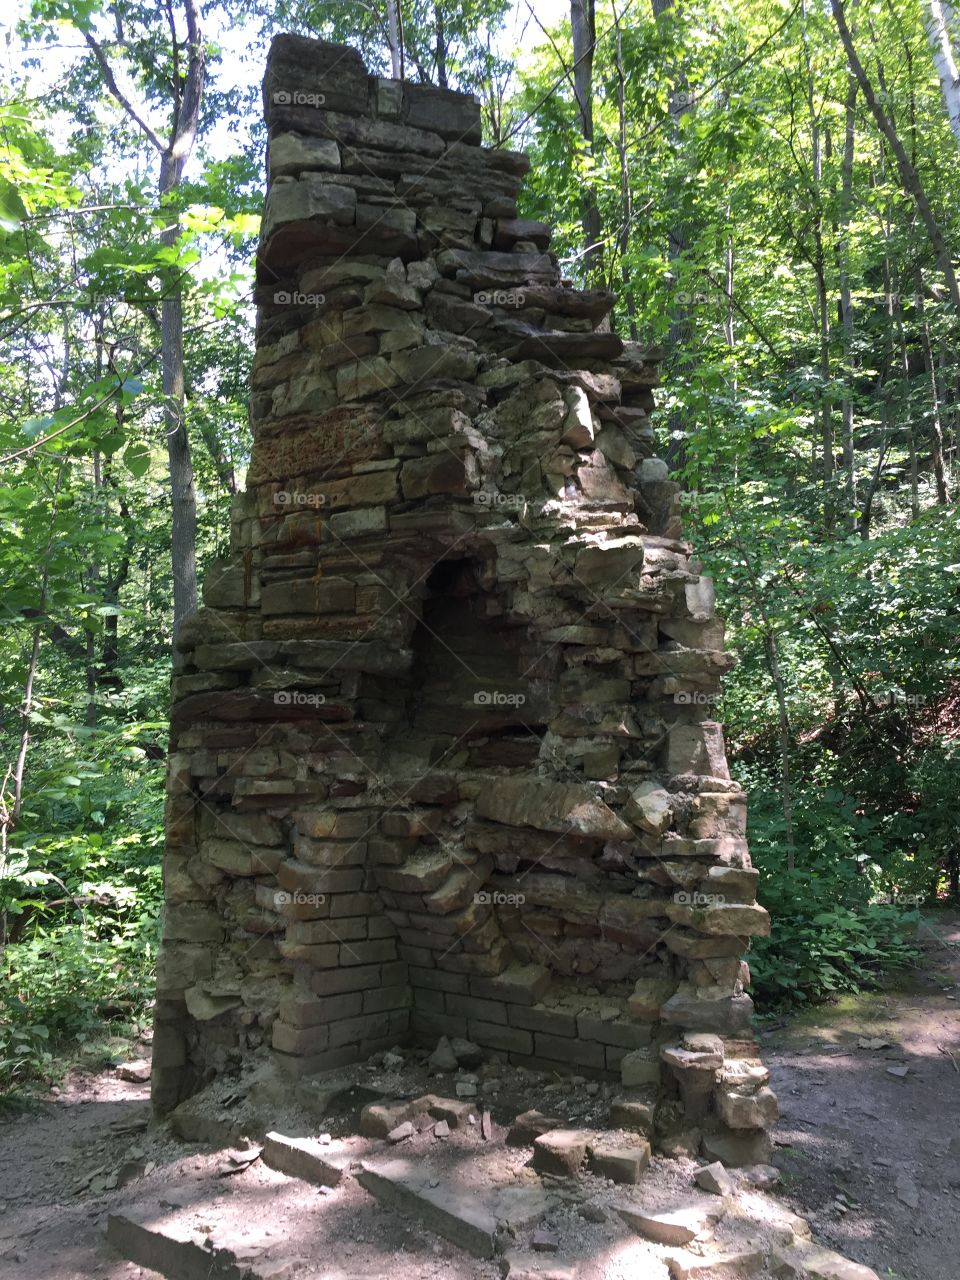 What remains of a stone house